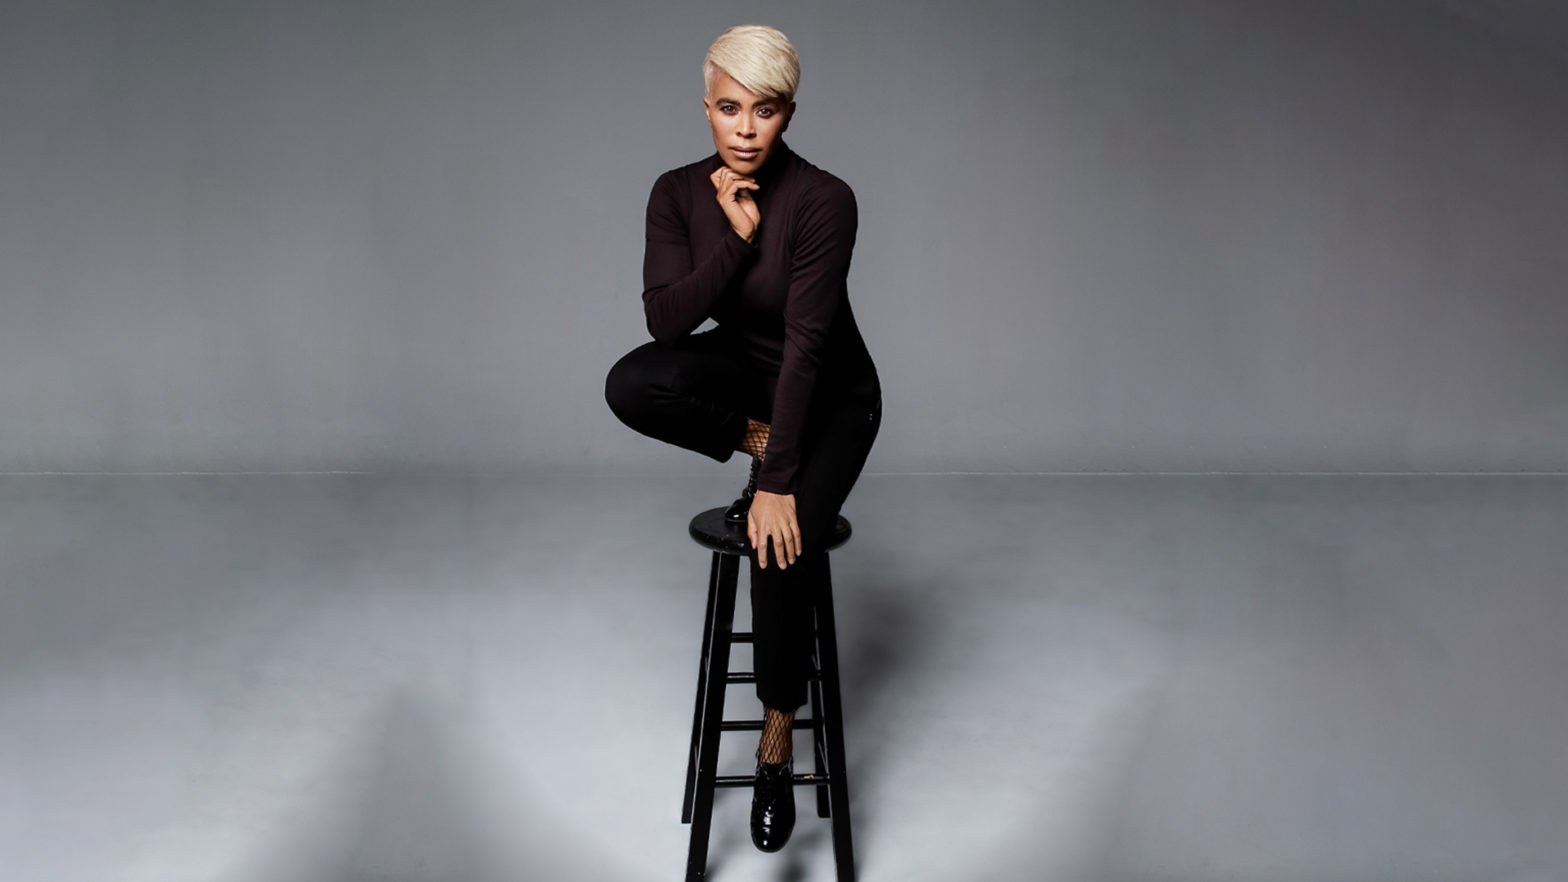 Laurieann Gibson To Launch First-Of-Its-Kind Streaming Network To Make The World Dance